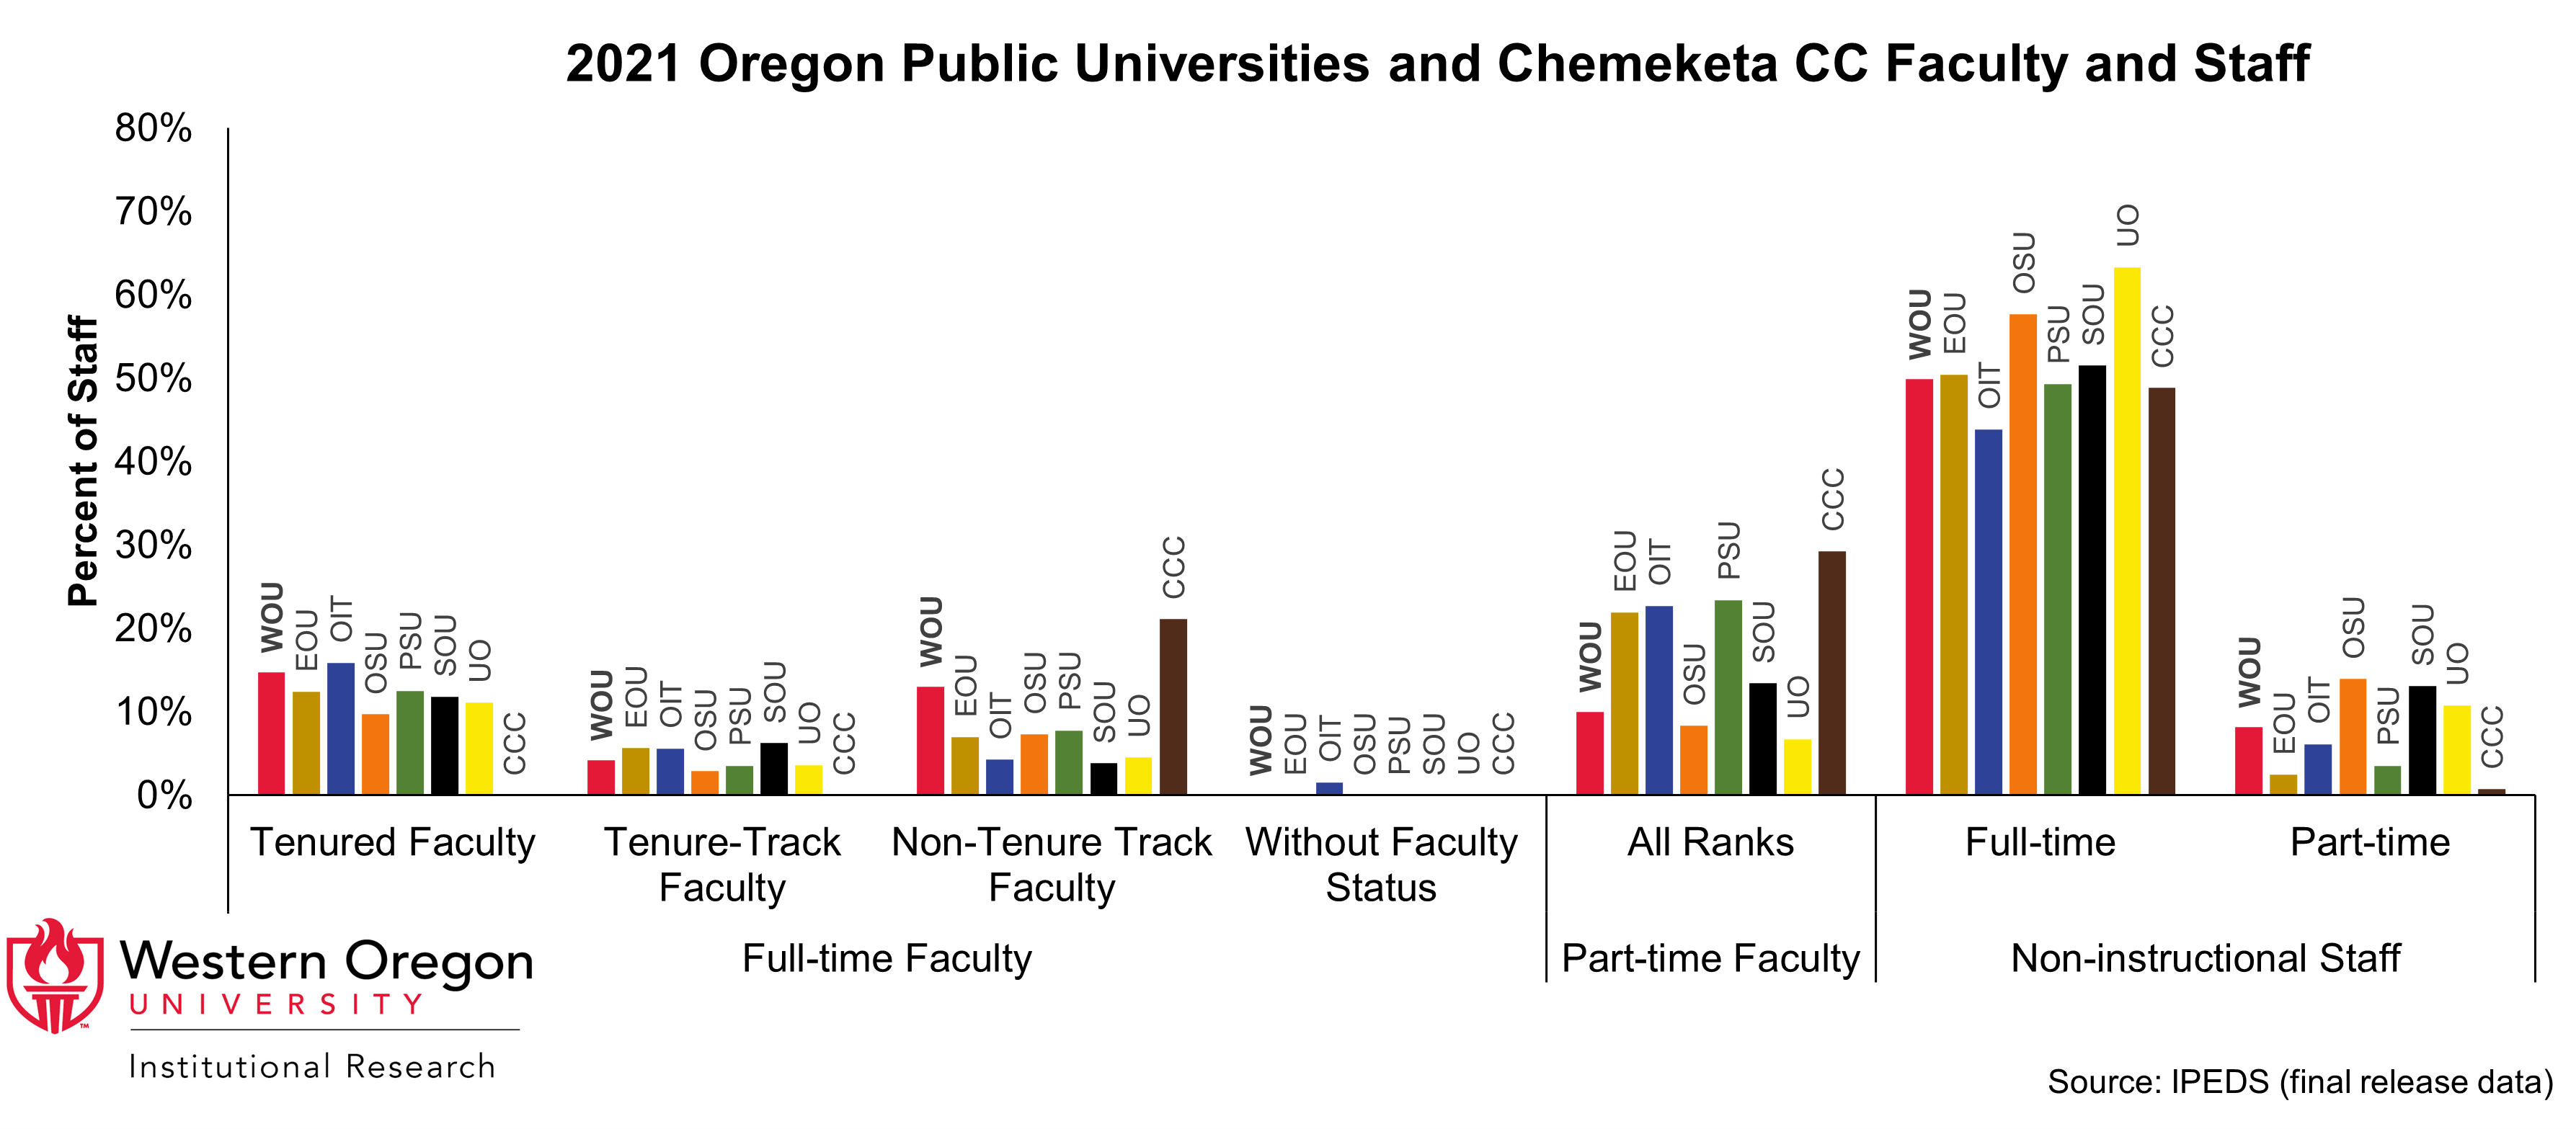 Bar graph of the percentage of faculty and staff at WOU and other Oregon Public Universities in most recent year, broken out by institution, faculty rank, instructional type, and full-time status